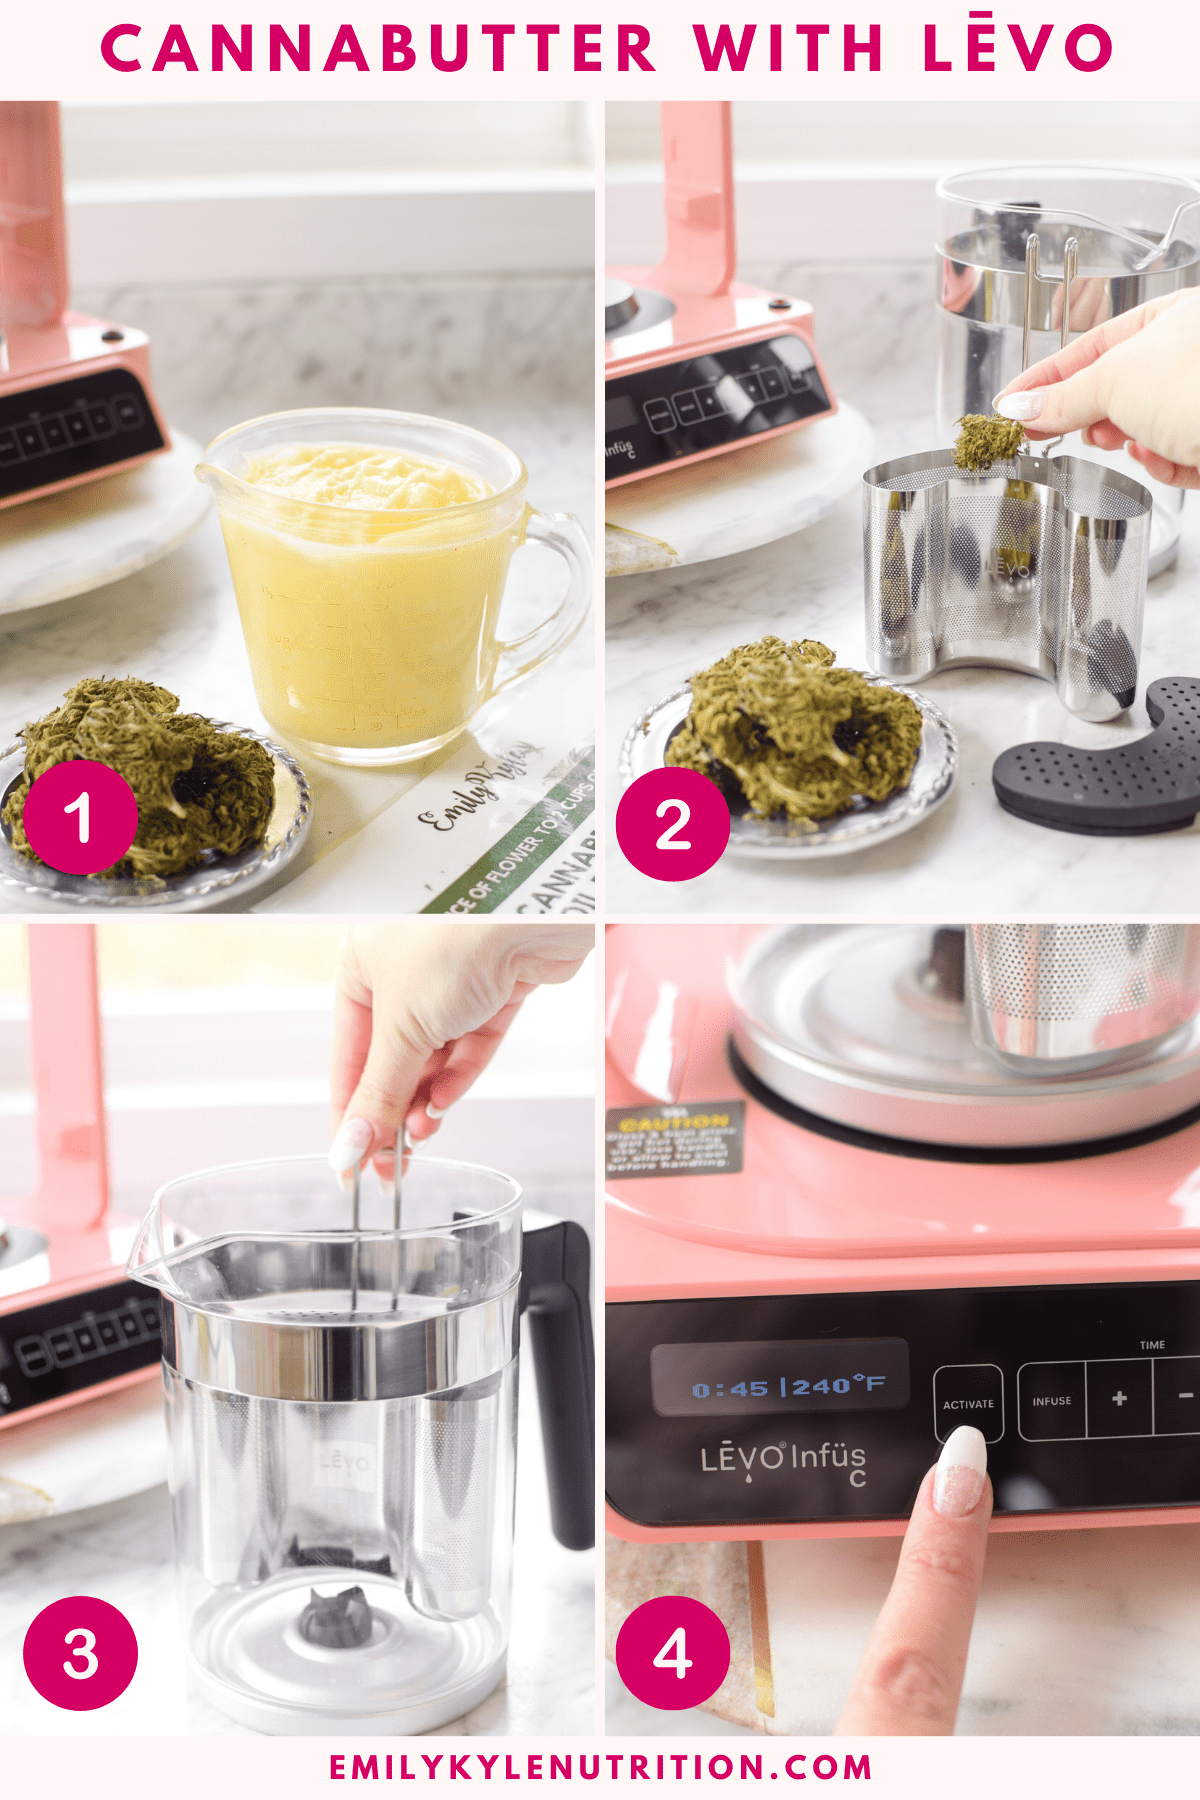 The first four images in a collage showing how to use the Levo machine to make cannabutter.